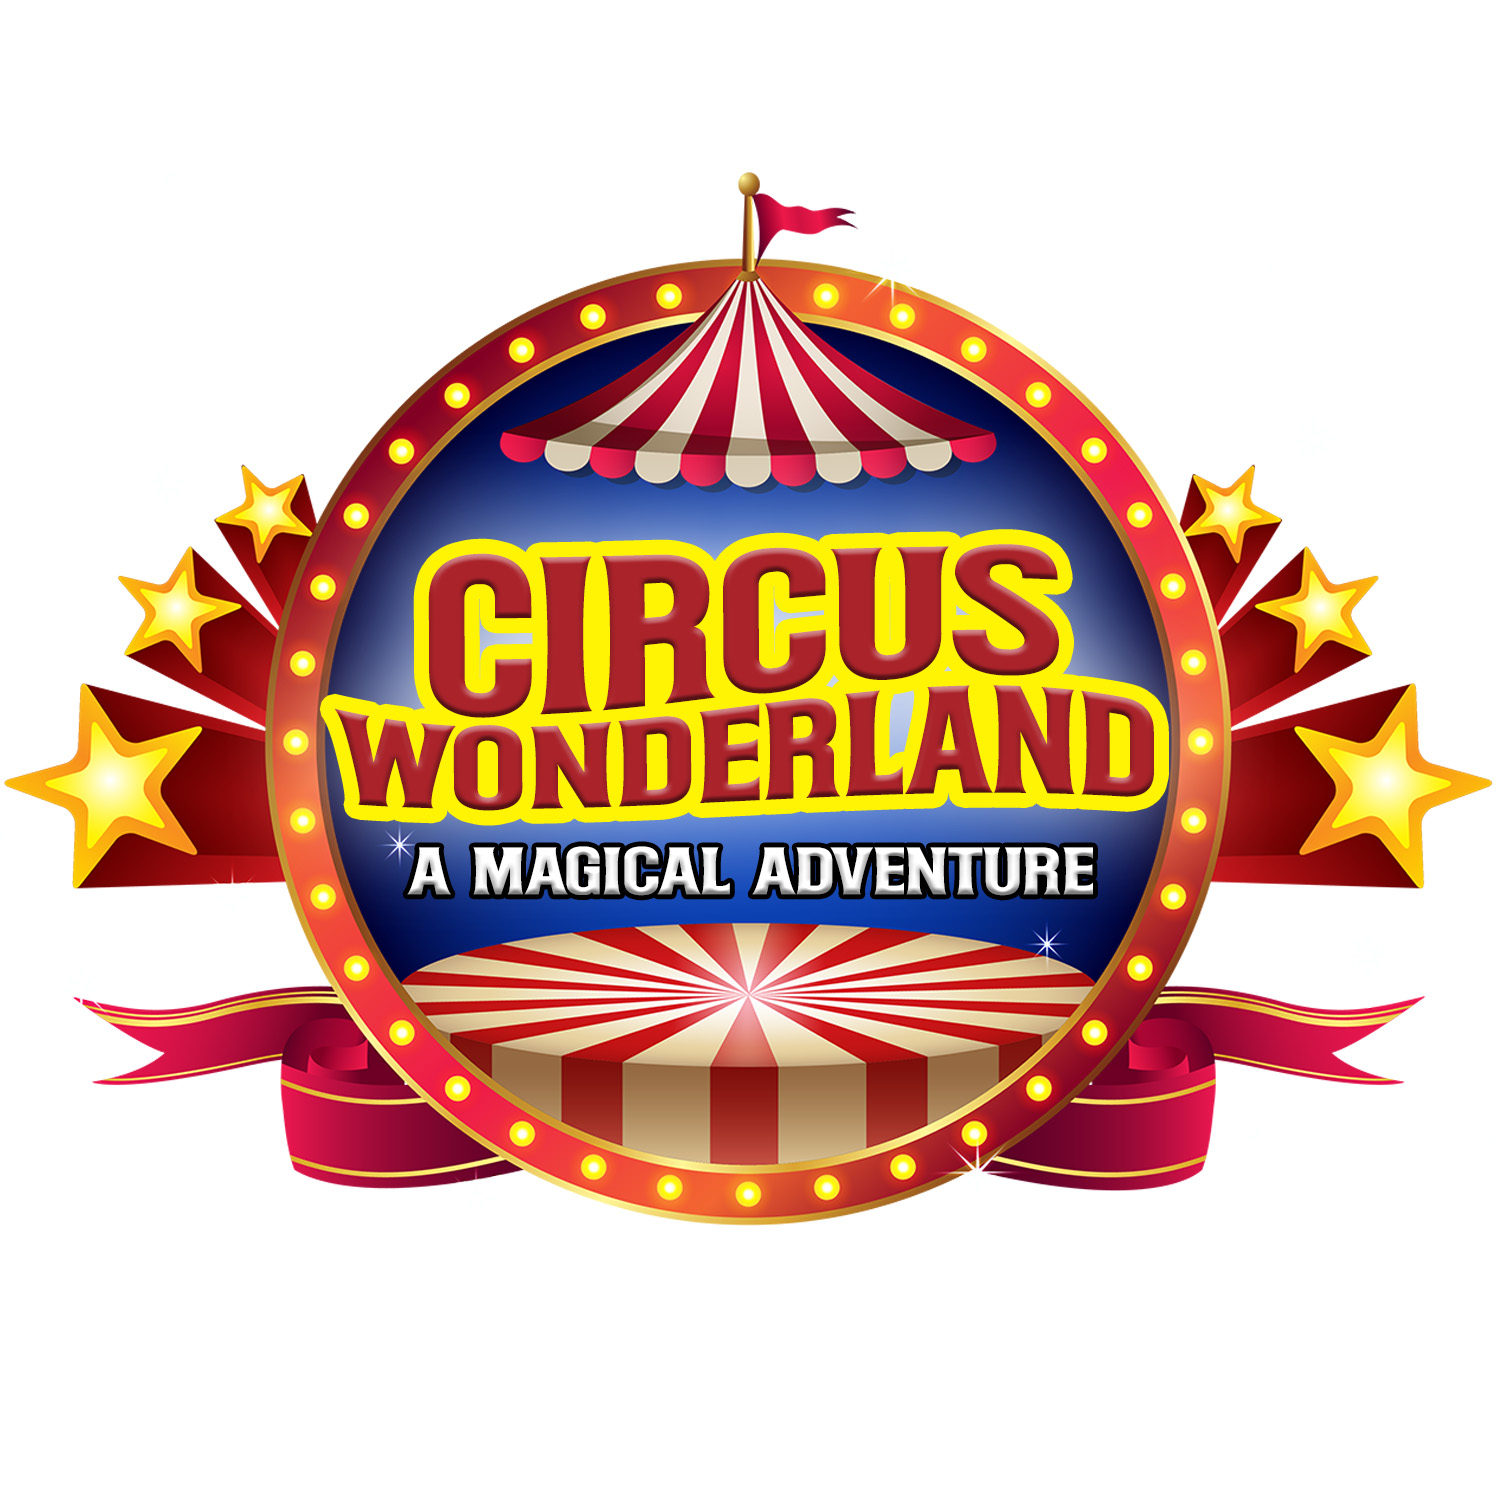 Circus Wonderland A Magical Adventure logo Colorful red and yellow circus theme logo with big top tent and starts